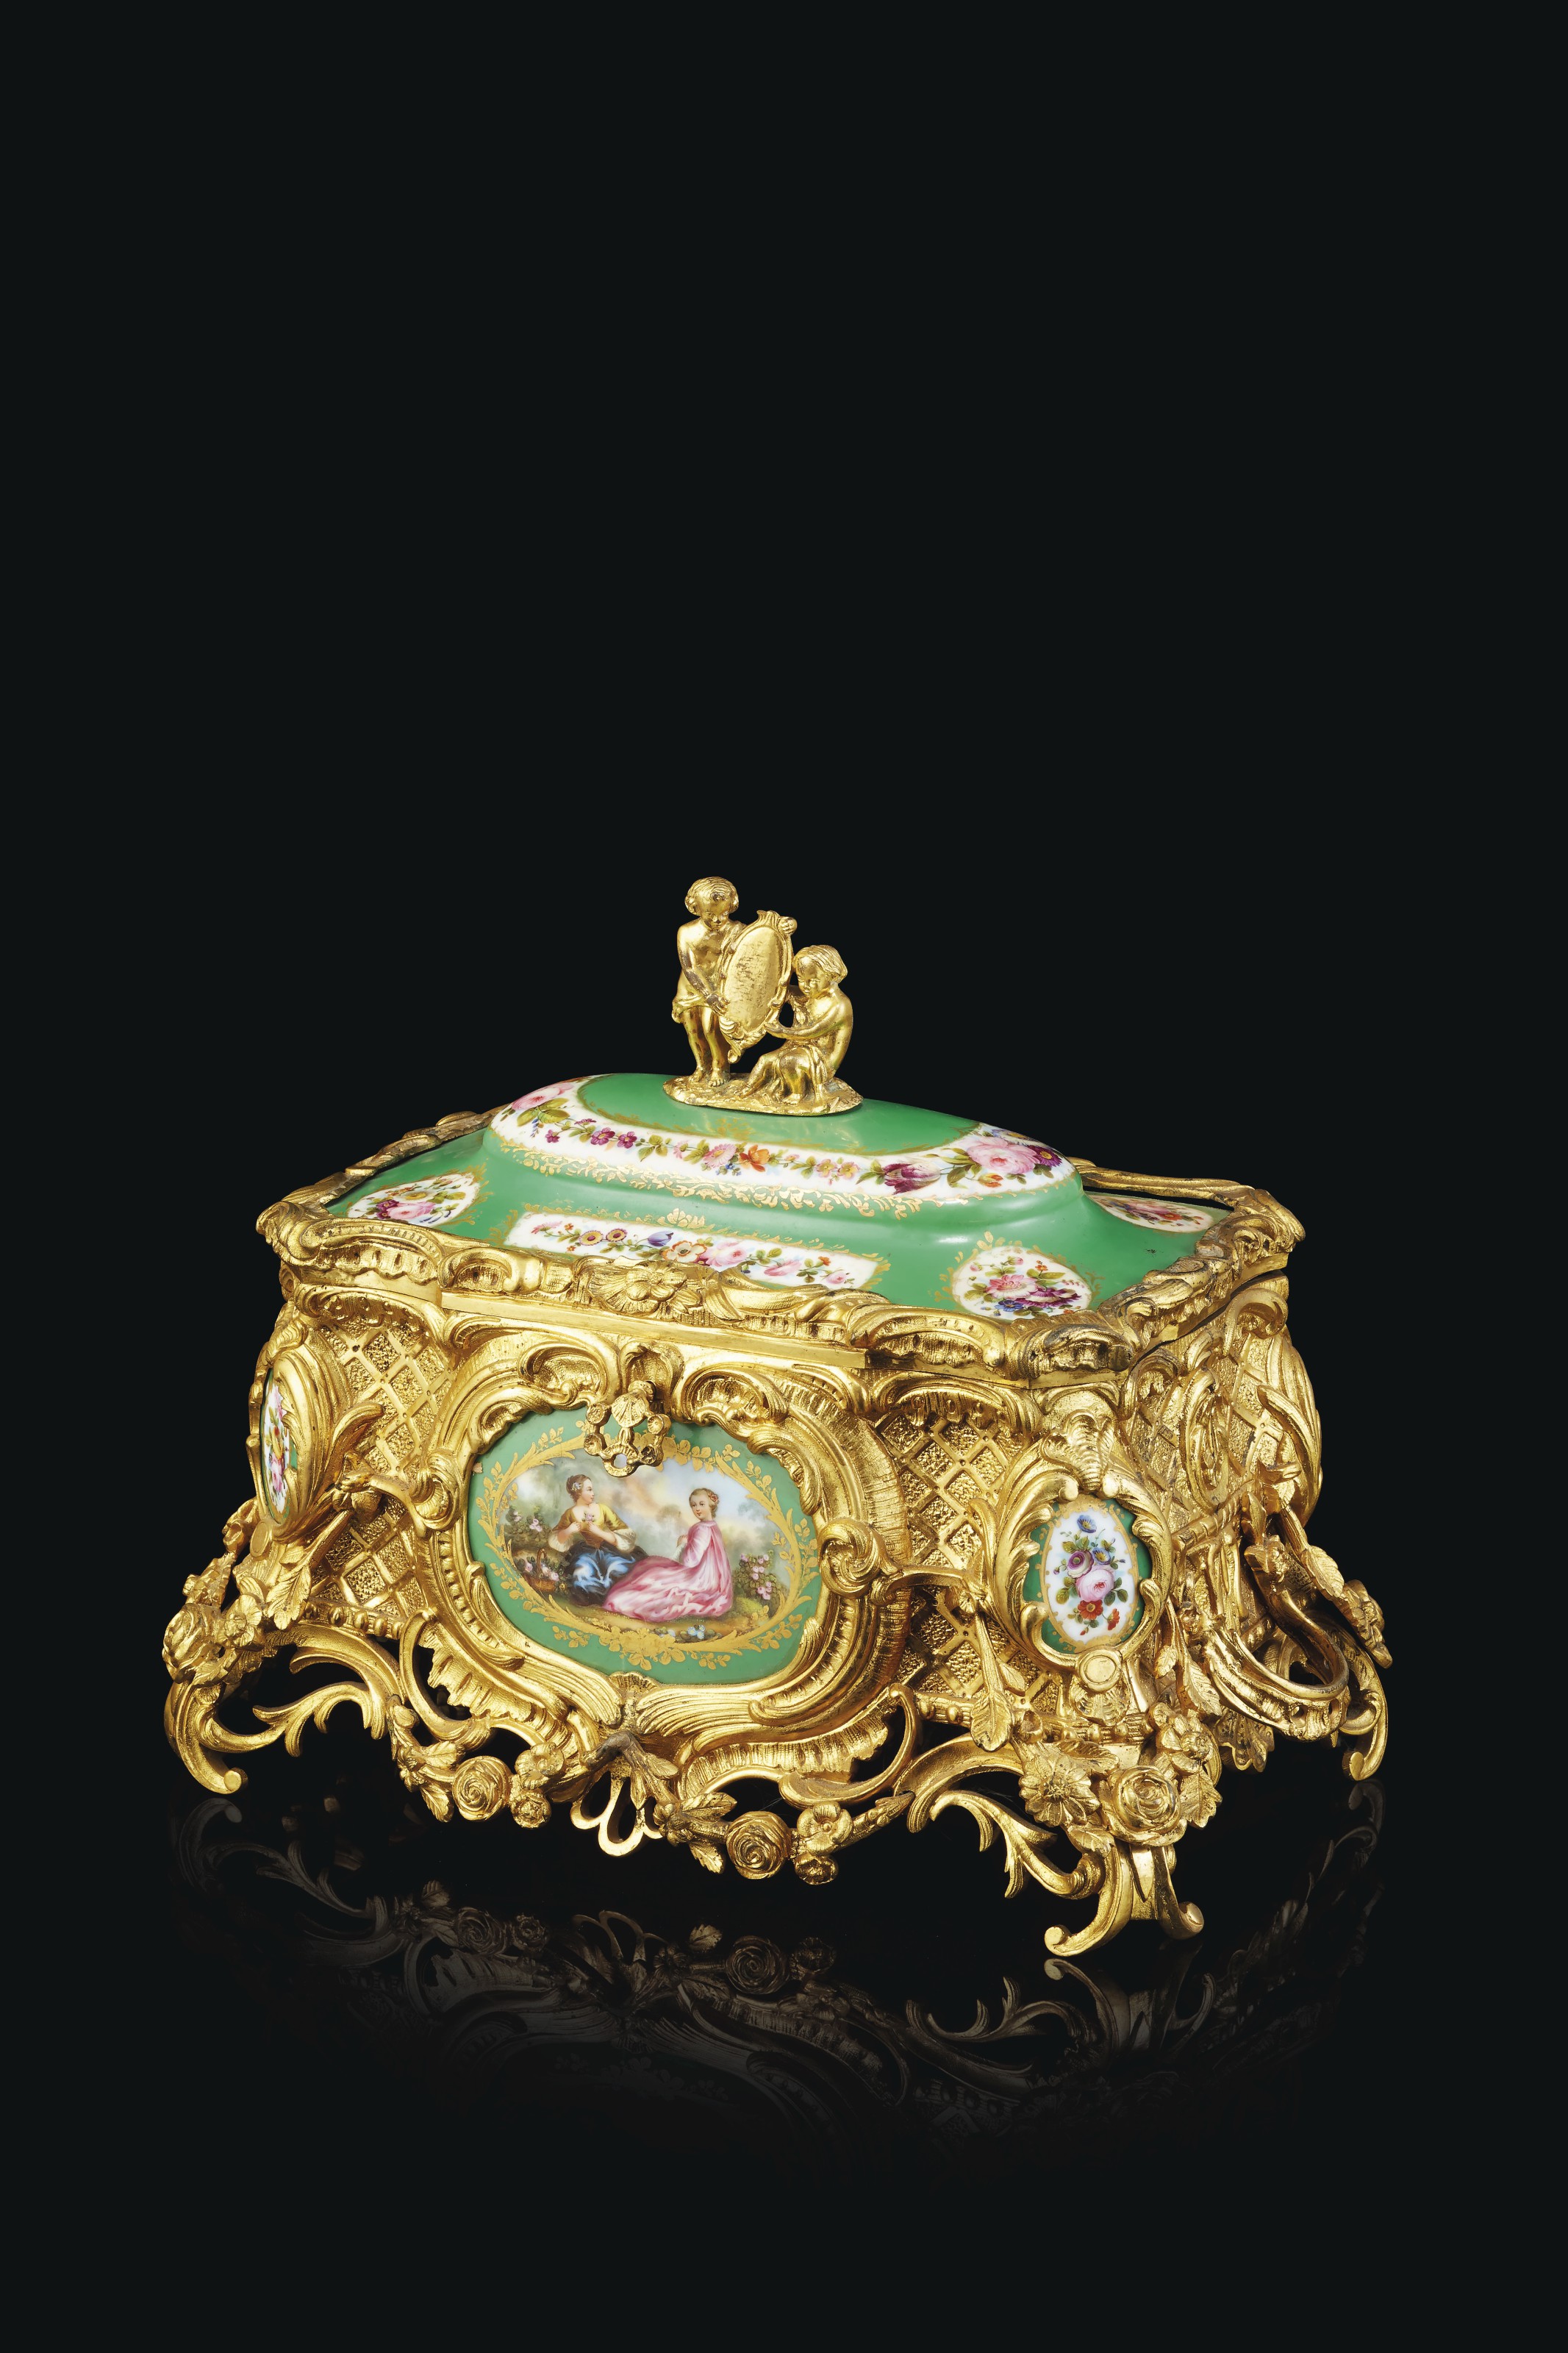 2020-NYR-19552-0123-001-an-ormolu-mounted-french-porcelain-green-ground-jewel-casket-mid-1